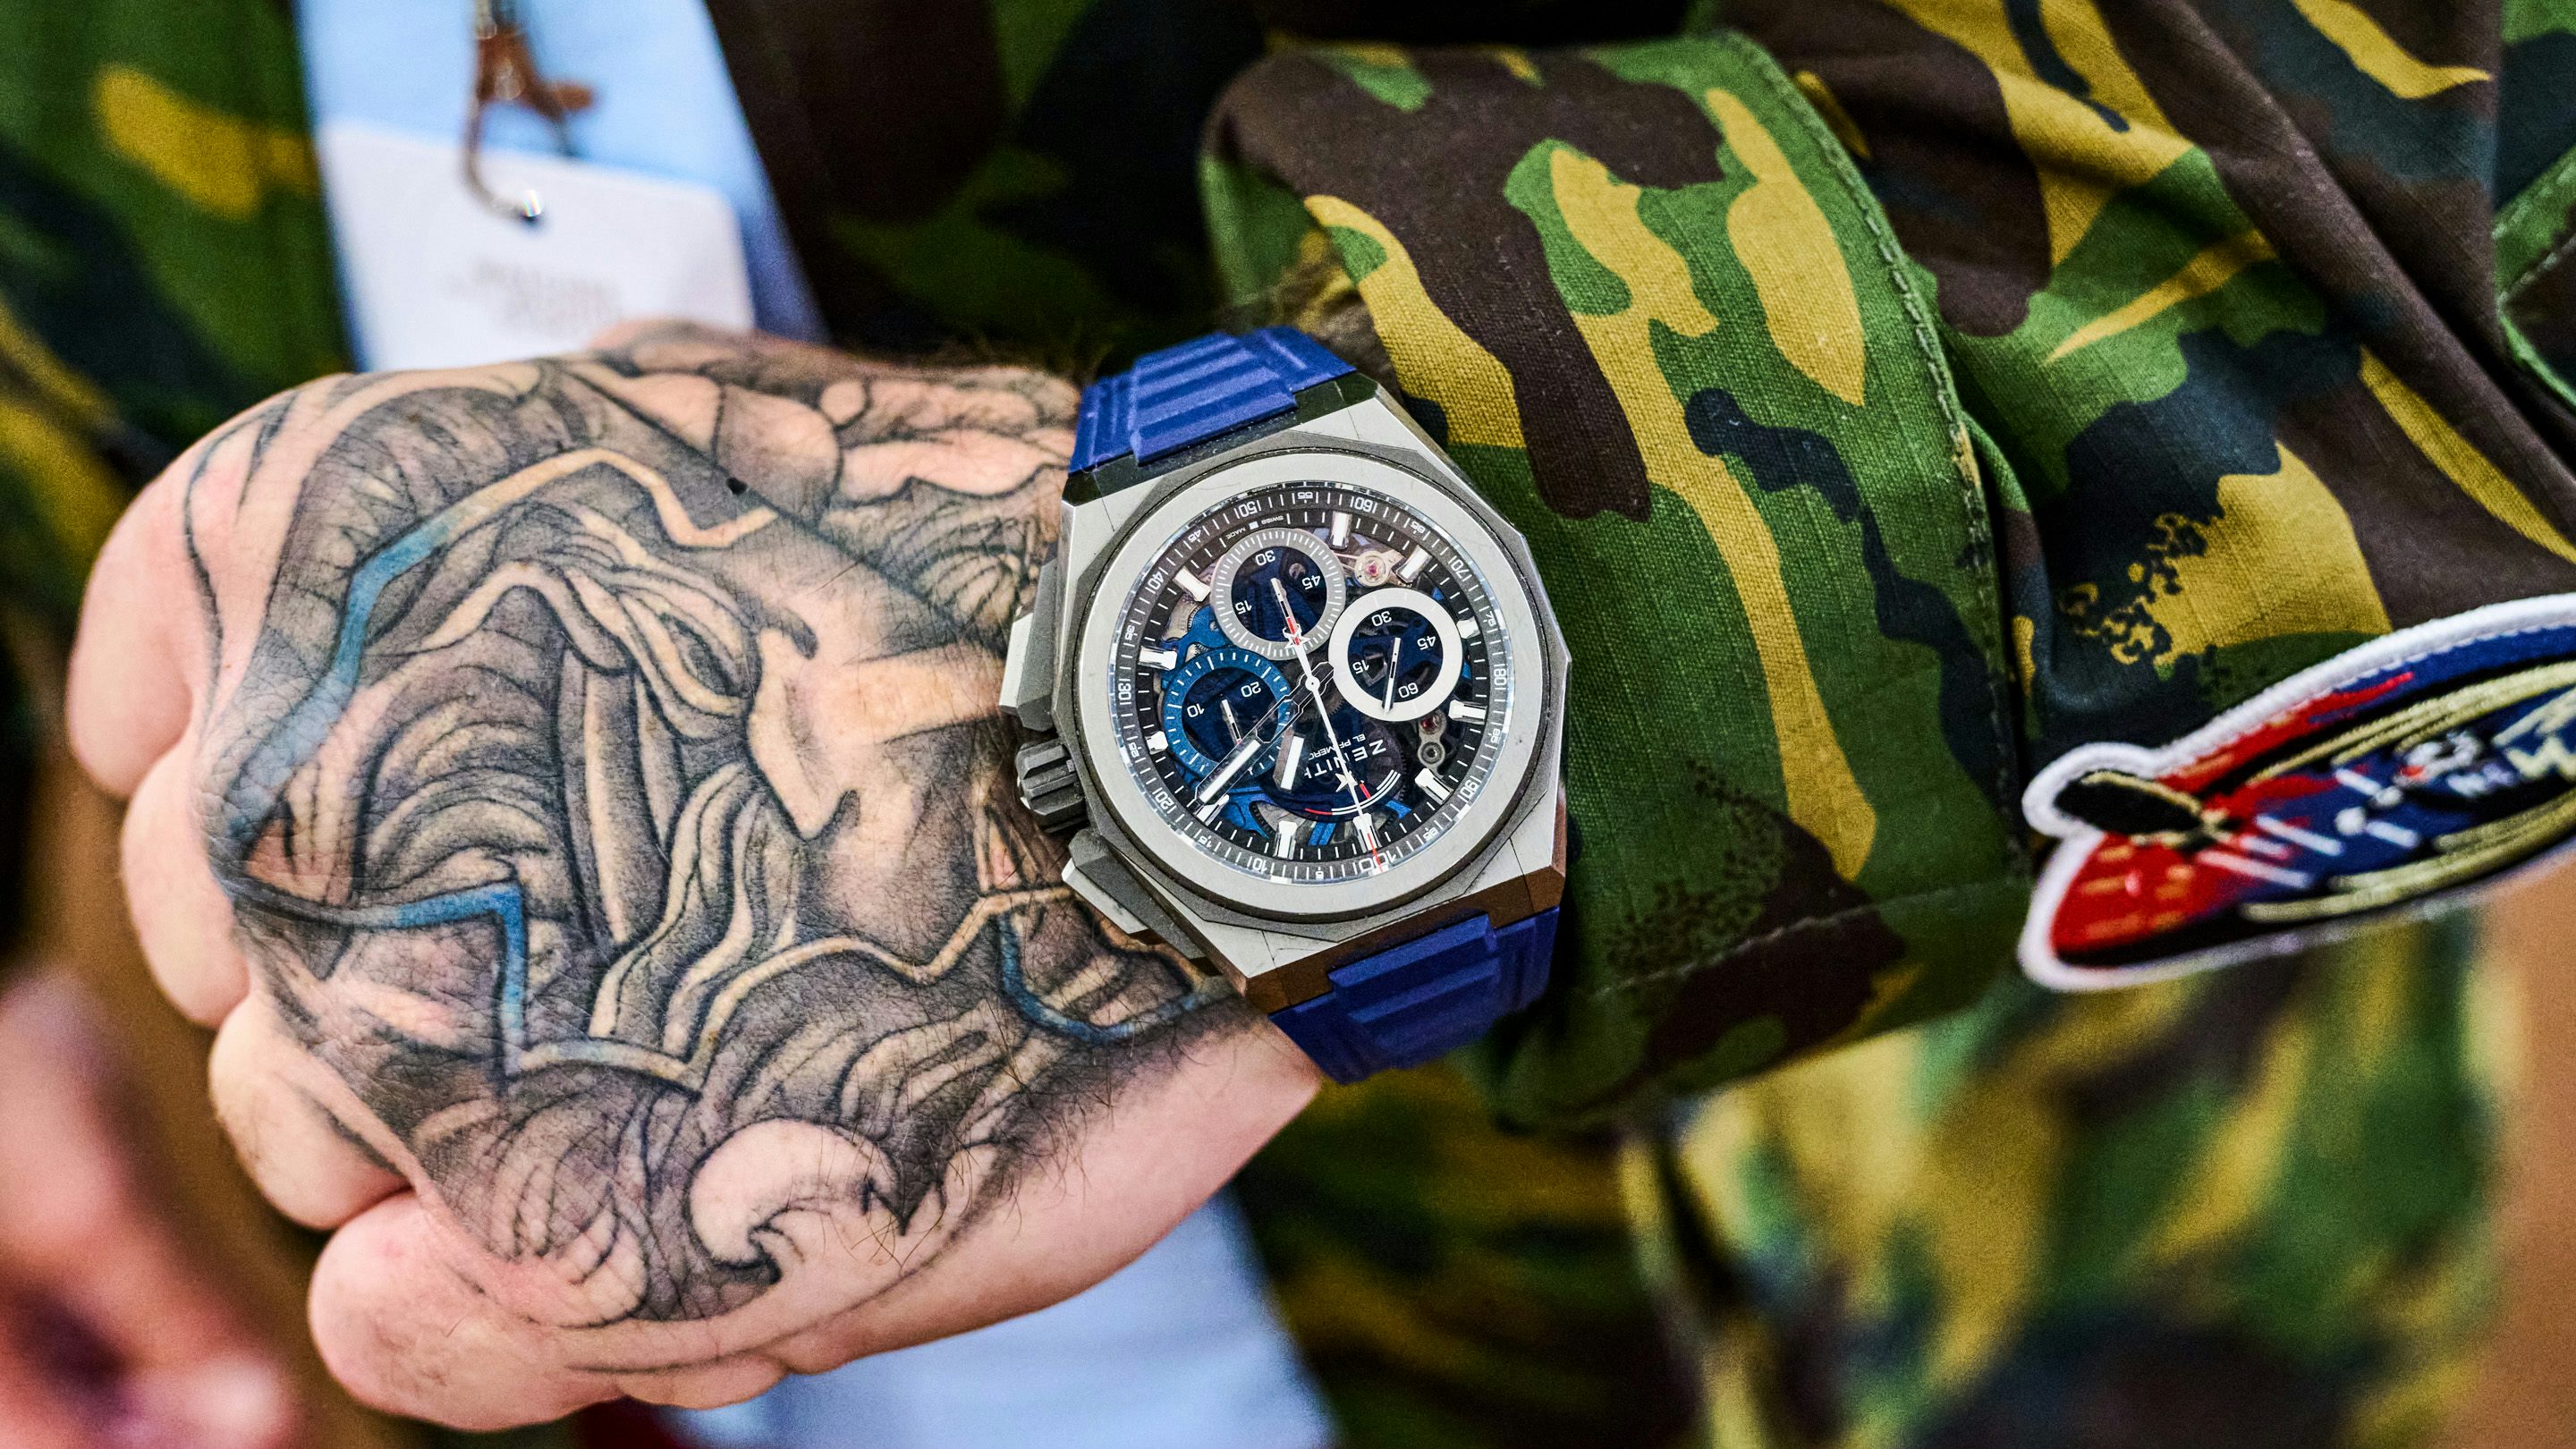 Photo Report: From Suits To Streetwear, The Style Of Watches